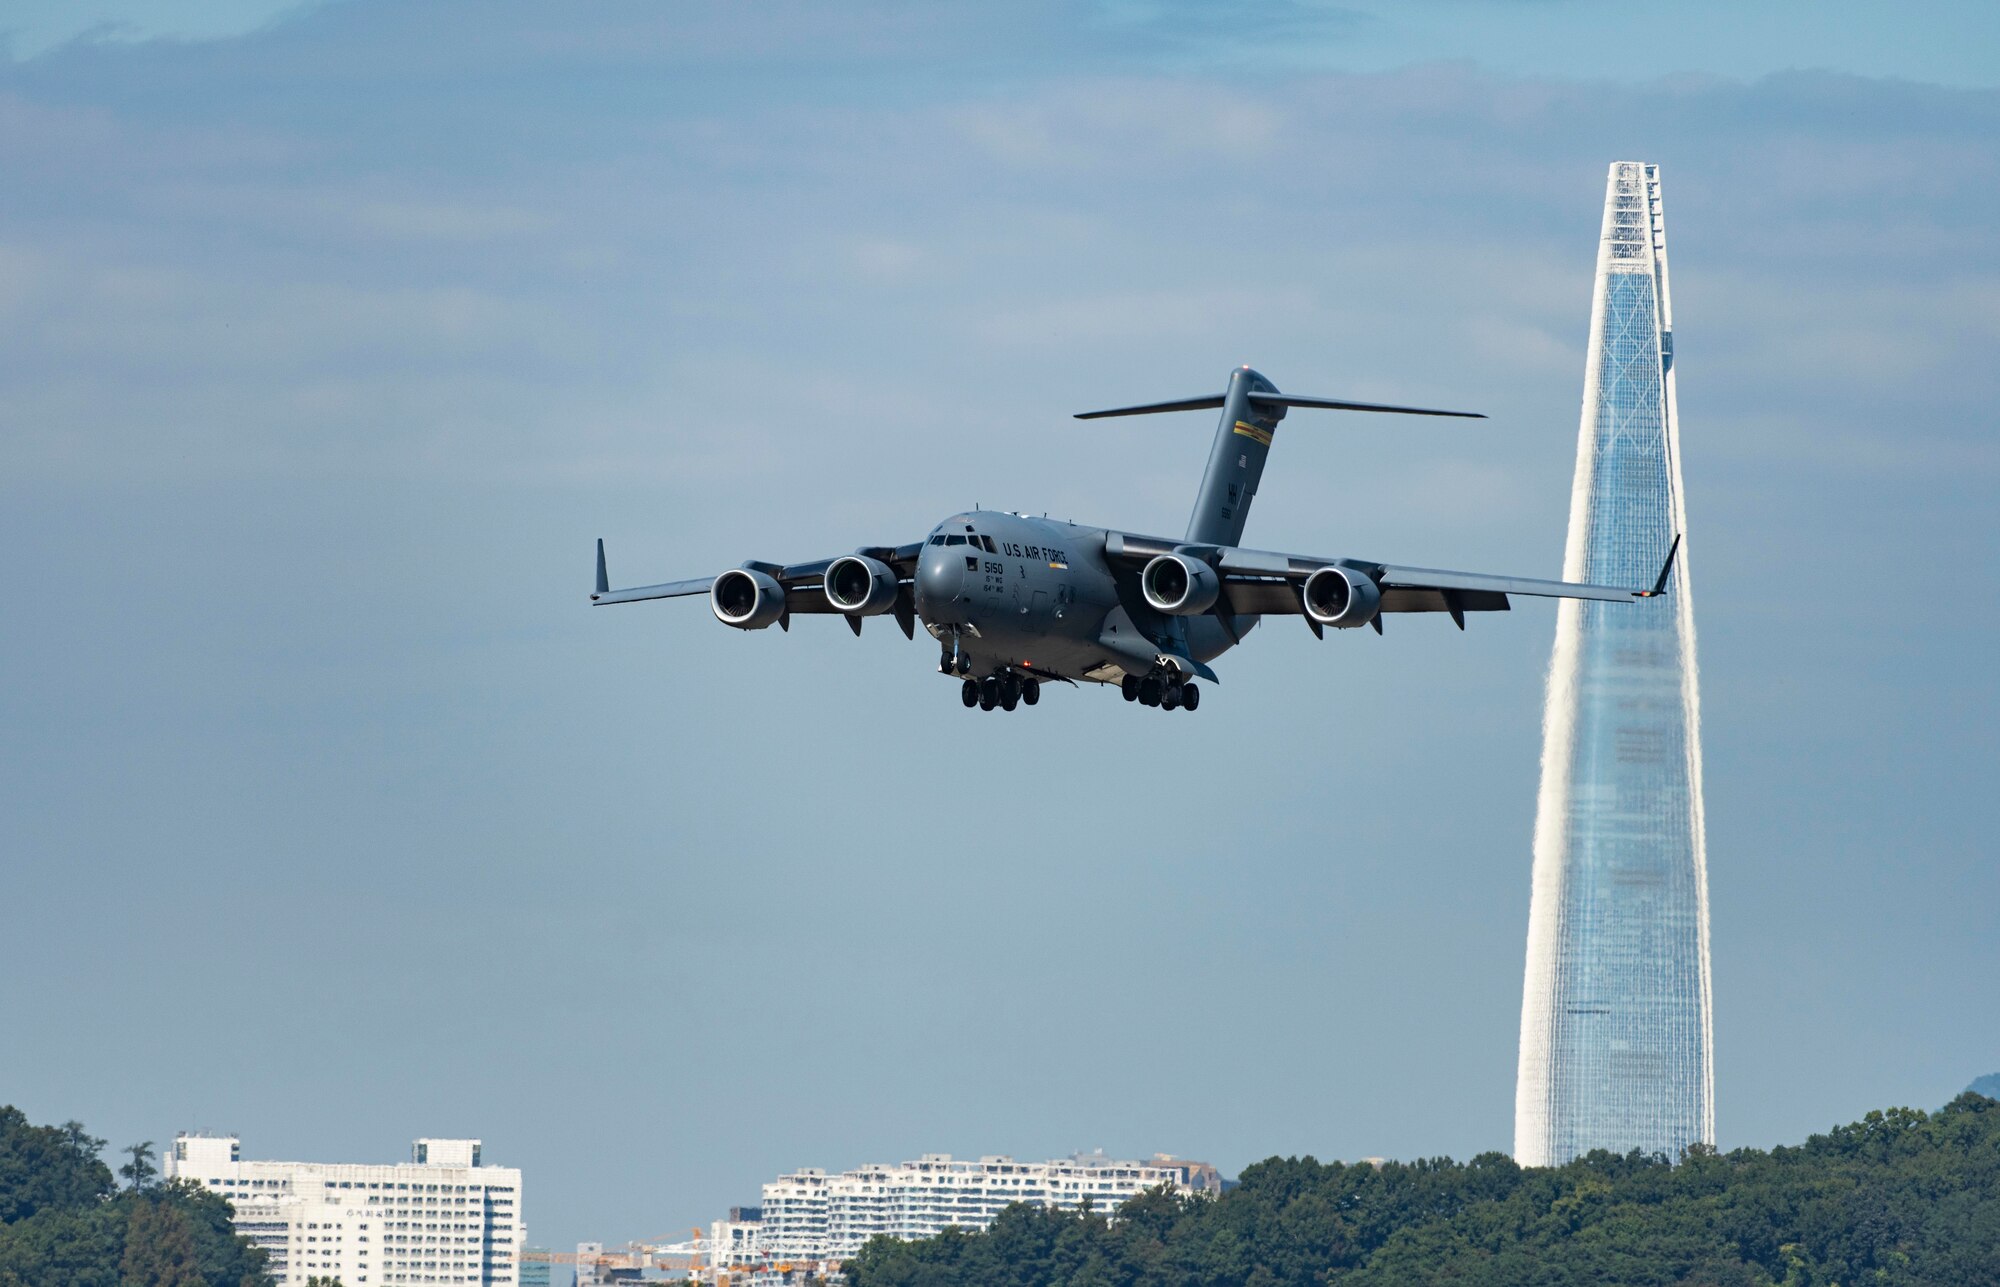 A U.S. Air Force C-17 Globemaster III, assigned to the 535th Airlift Squadron based at Joint Base Pearl-Harbor Hickam, Hawaii, prepares for landing at Seoul Air Base, Republic of Korea, as part of the Seoul International Aerospace and Defense Exhibition 2021, Oct. 18. Seoul ADEX 21 offers a venue to deepen our relationship with the Republic of Korea and enhance regional security through expanded military-to-military cooperation and with regional partners and allies. (U.S. Air Force photo by Staff Sgt. Gabrielle Spalding)